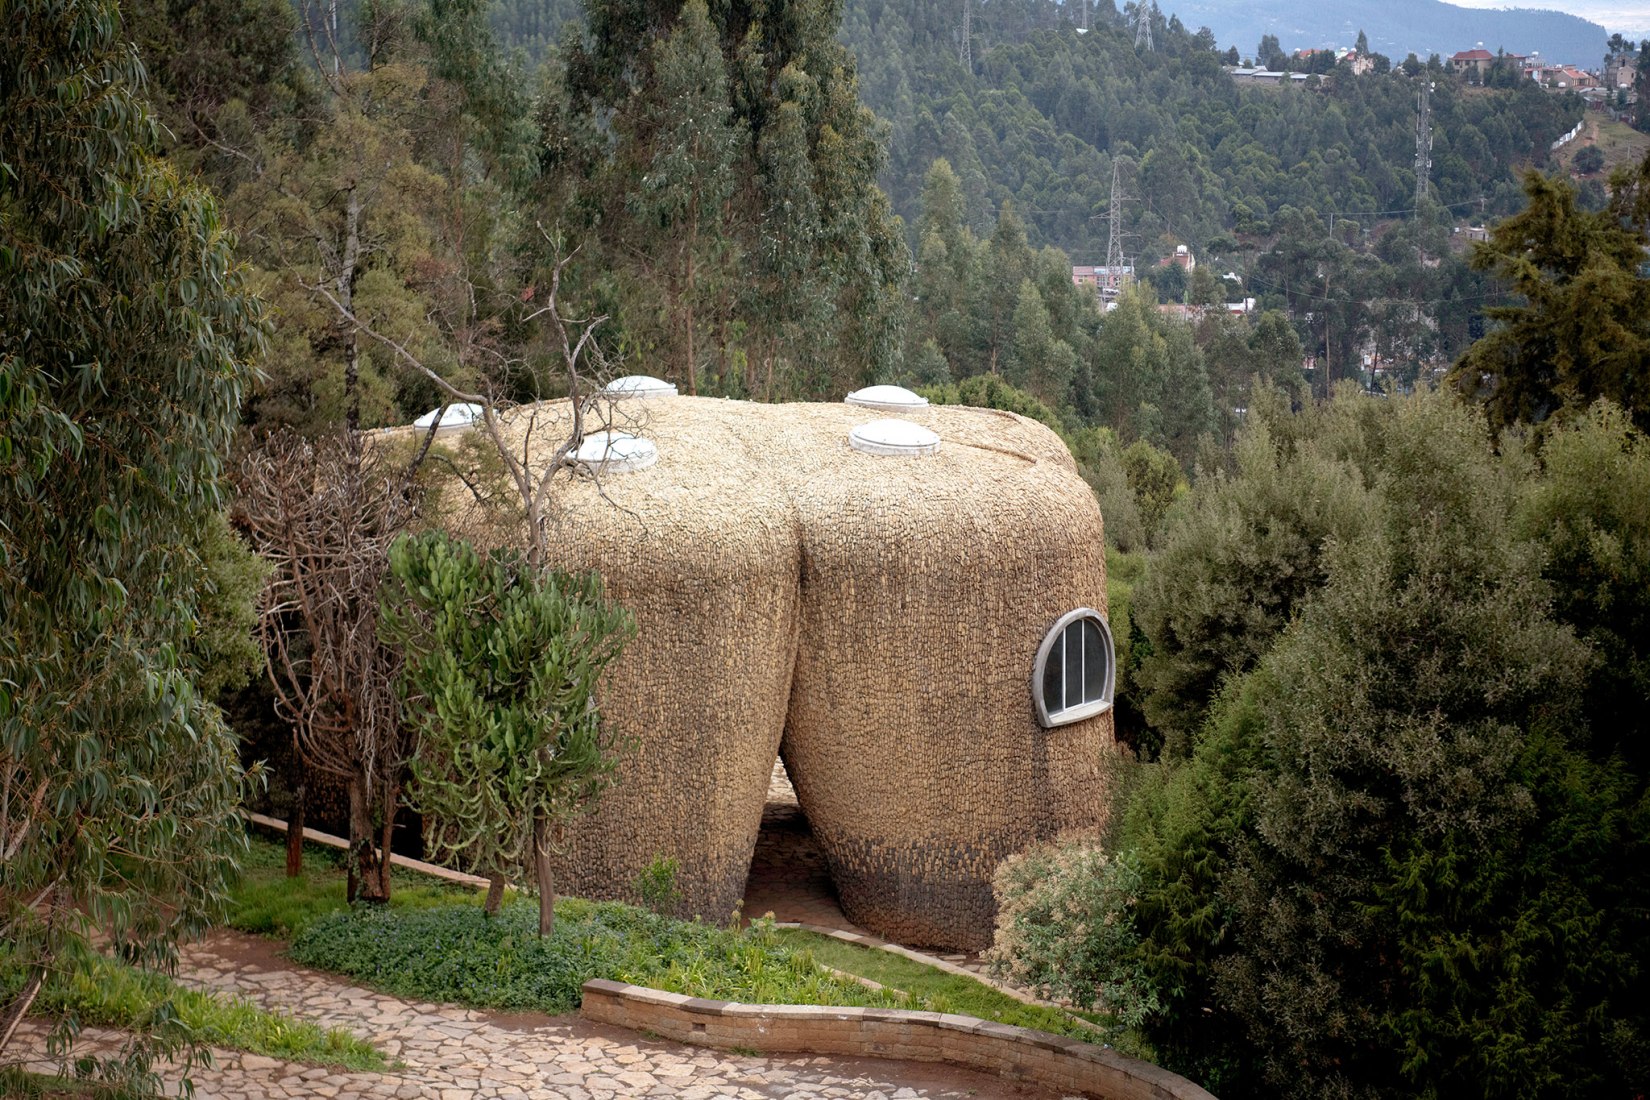 Research centre. The Meles Zenawi Memorial Park by Studio Other Spaces. Photograph by Michael Tsegaye.